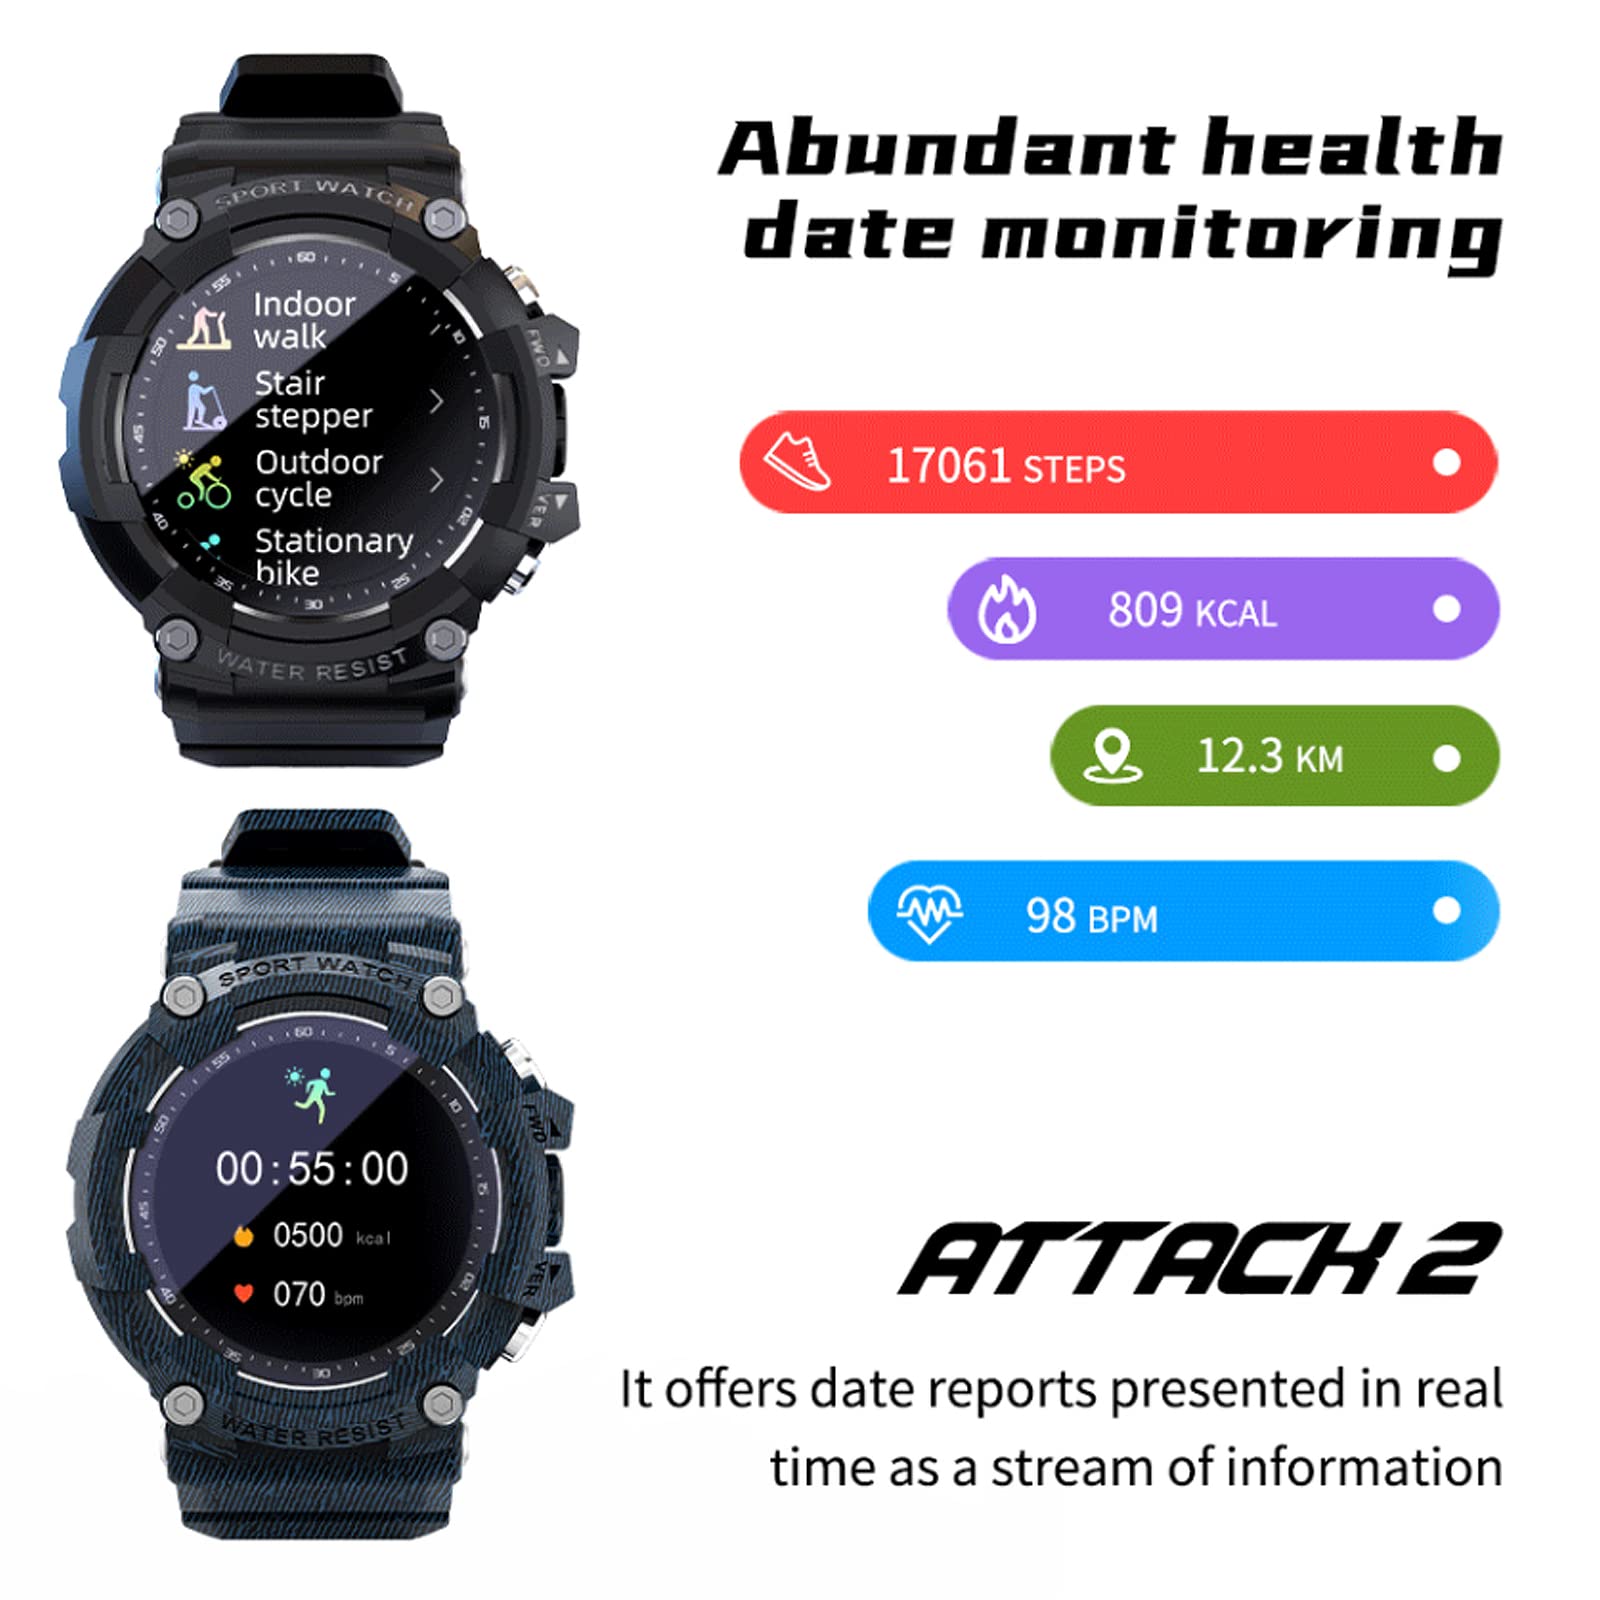 Oxsioeih Military Tactical Smart Watches for Men 1.28